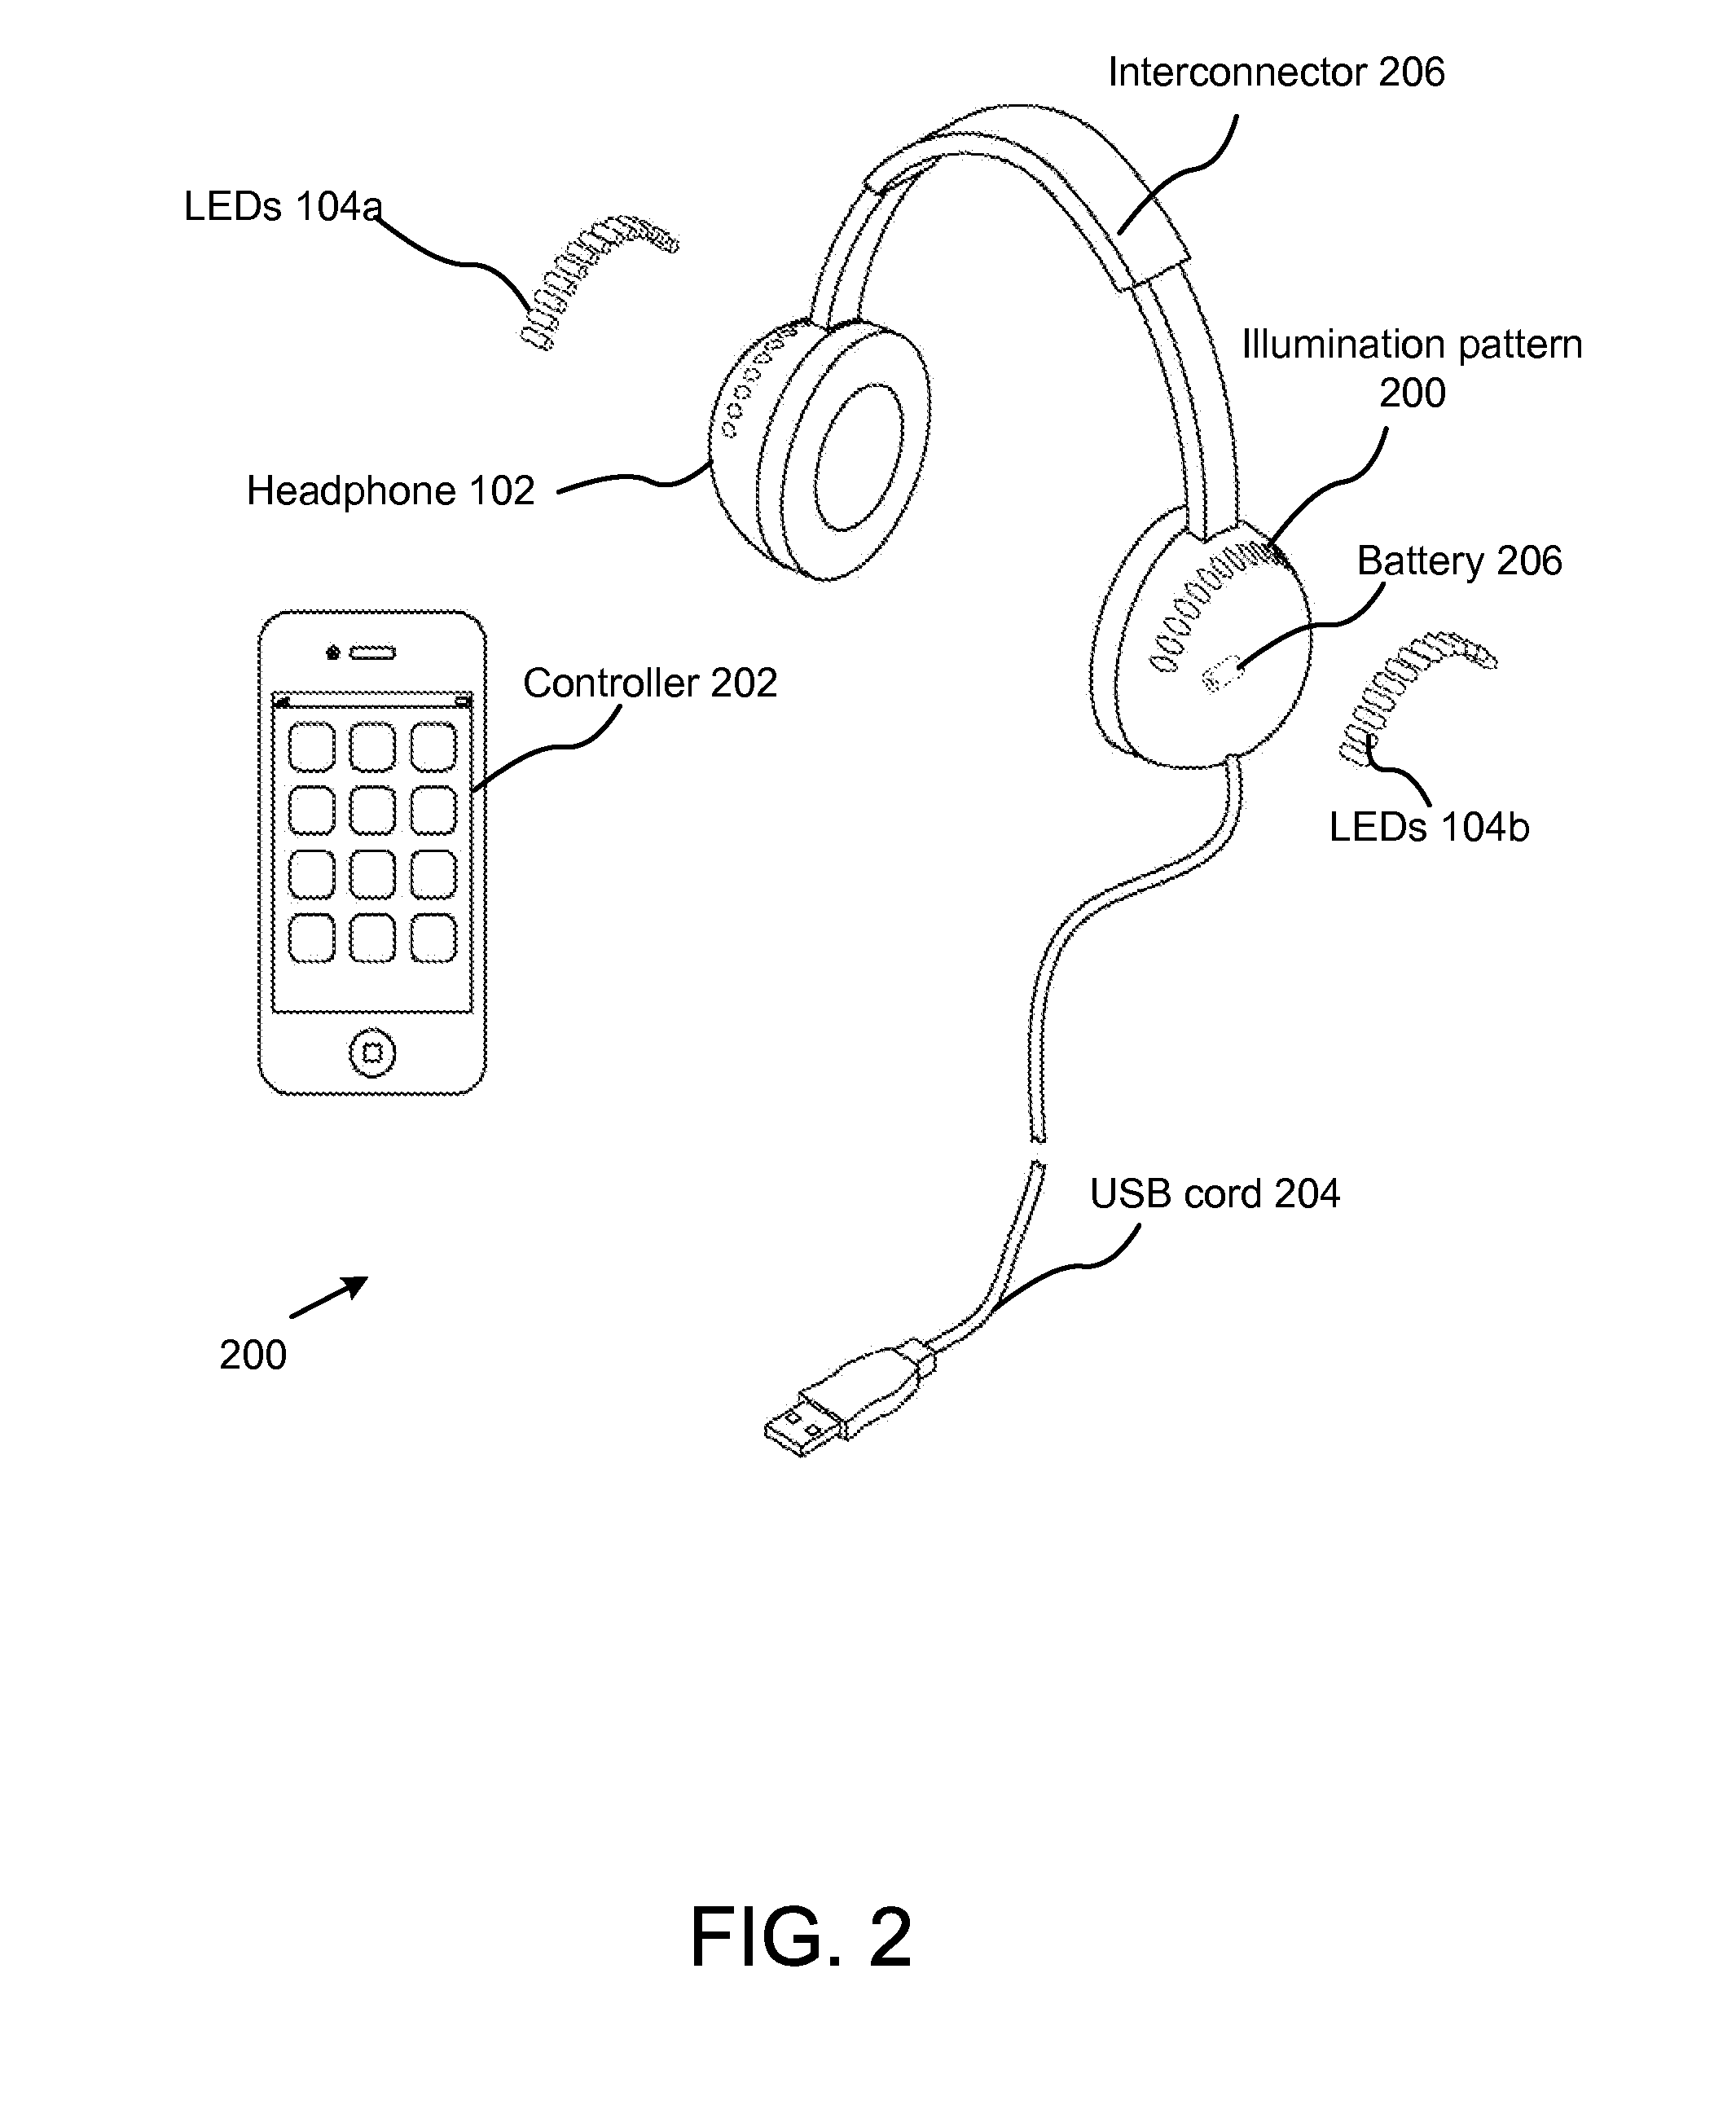 System and method for illuminating a headphone to indicate volume and/or beat